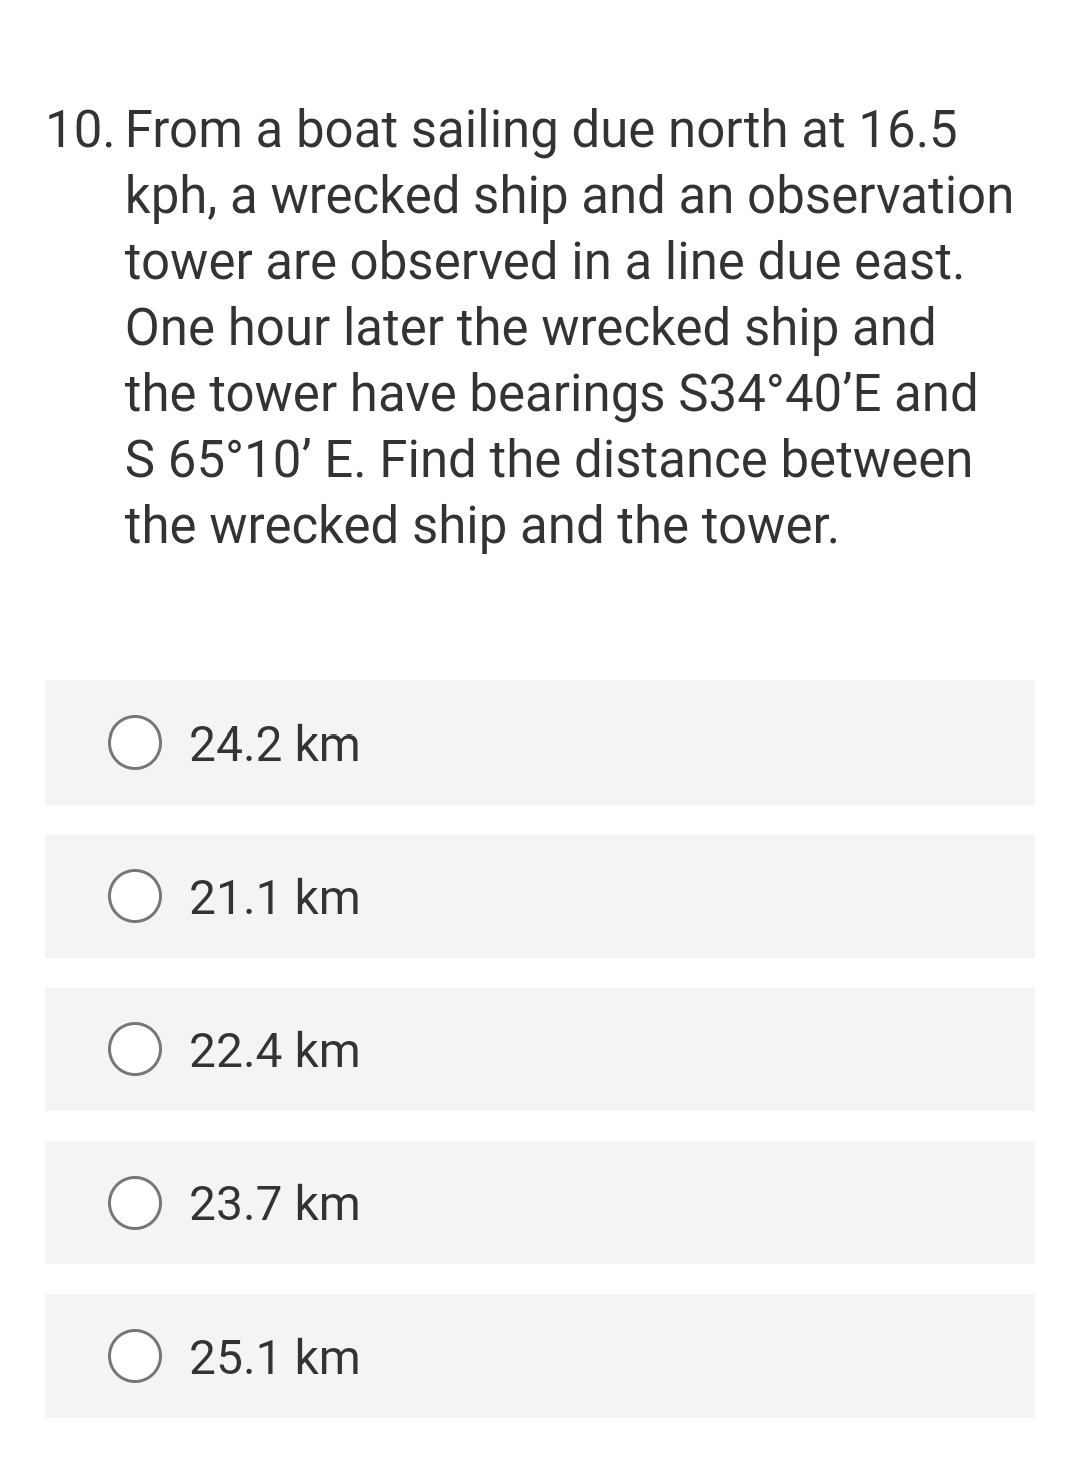 10. From a boat sailing due north at 16.5
kph, a wrecked ship and an observation
tower are observed in a line due east.
One hour later the wrecked ship and
the tower have bearings S34°40'E and
S 65°10' E. Find the distance between
the wrecked ship and the tower.
O 24.2 km
21.1 km
22.4 km
O 23.7 km
25.1 km